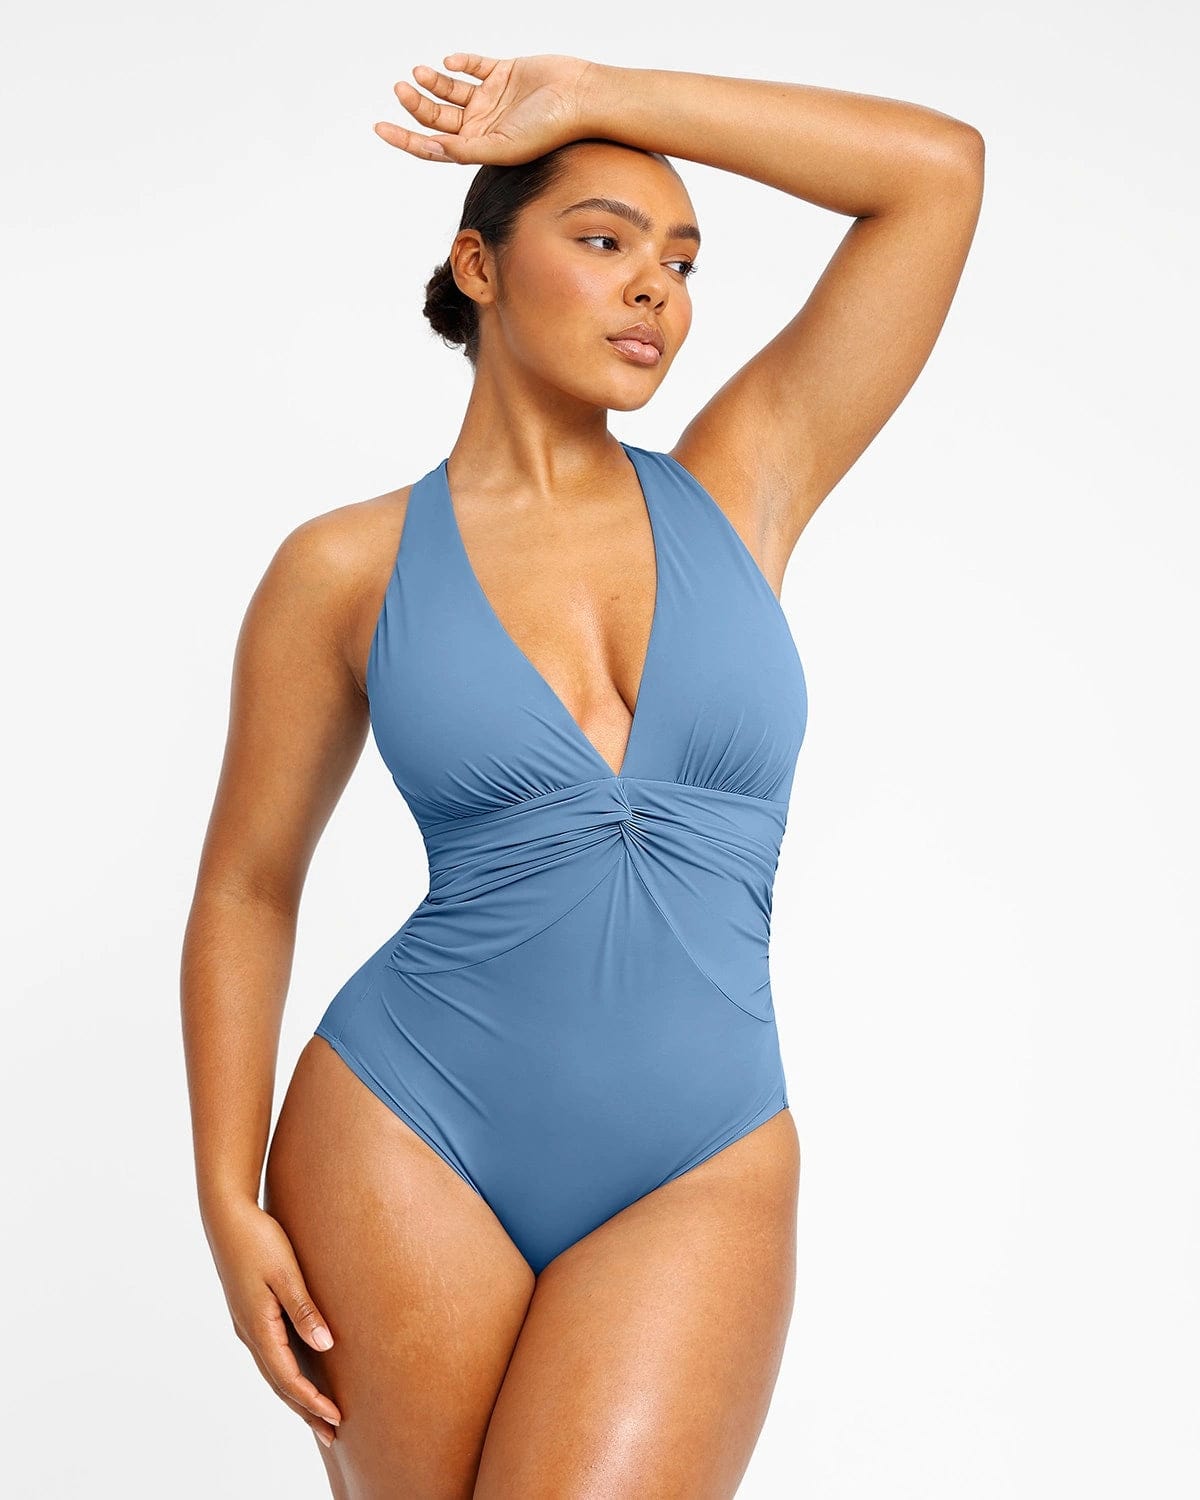 My favorite swimsuit company! All shapes, sizes, and ages. Acne scars,  stretch marks, rolls, cellulite, tan lines, and more! : r/Instagramreality